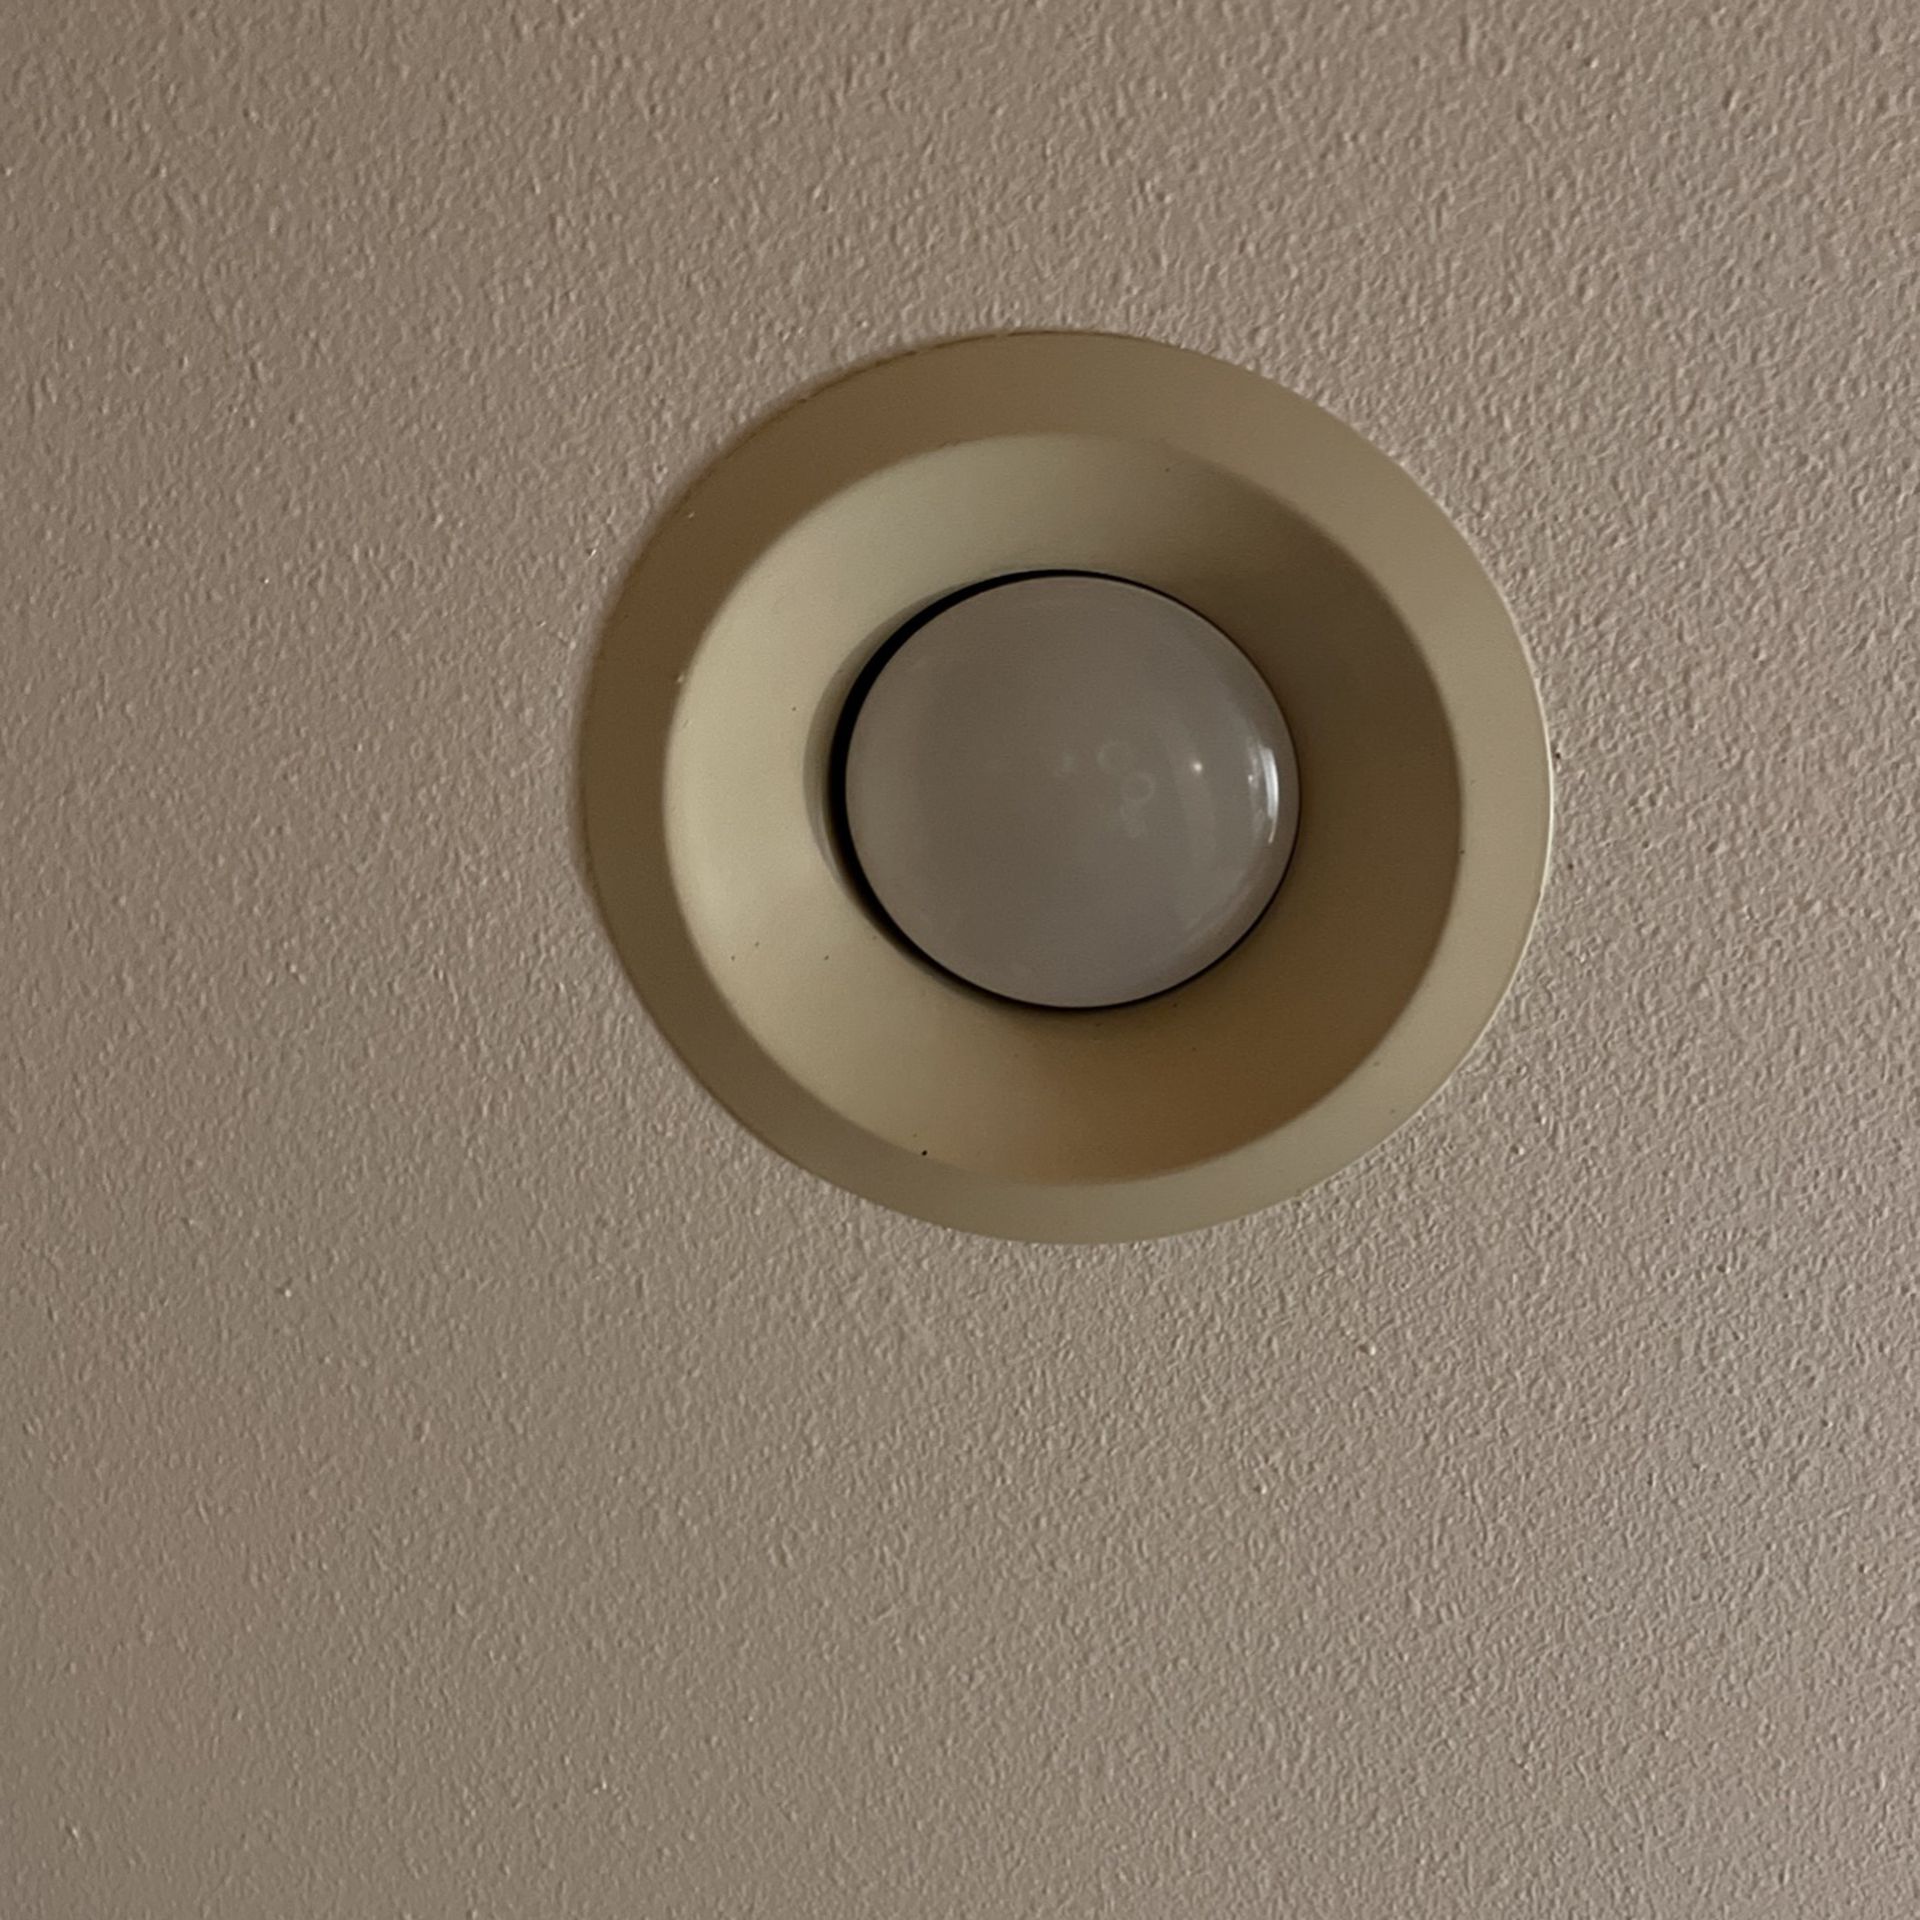 FREE: 12 Ceiling Light Plates And Bulbs